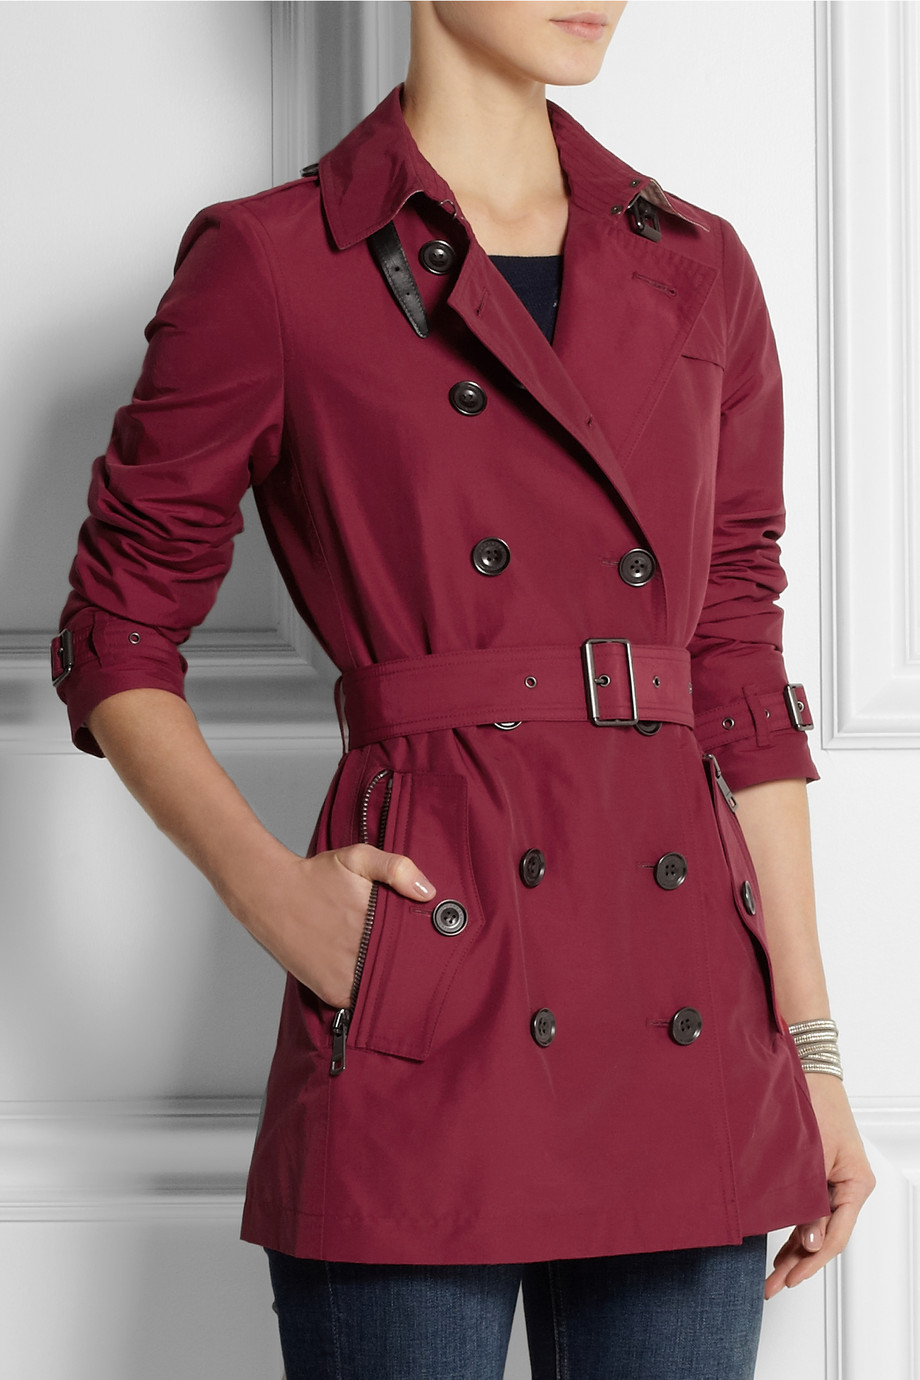 Burberry Brit Cottonblend Twill Trench Coat in Claret (Red) - Lyst